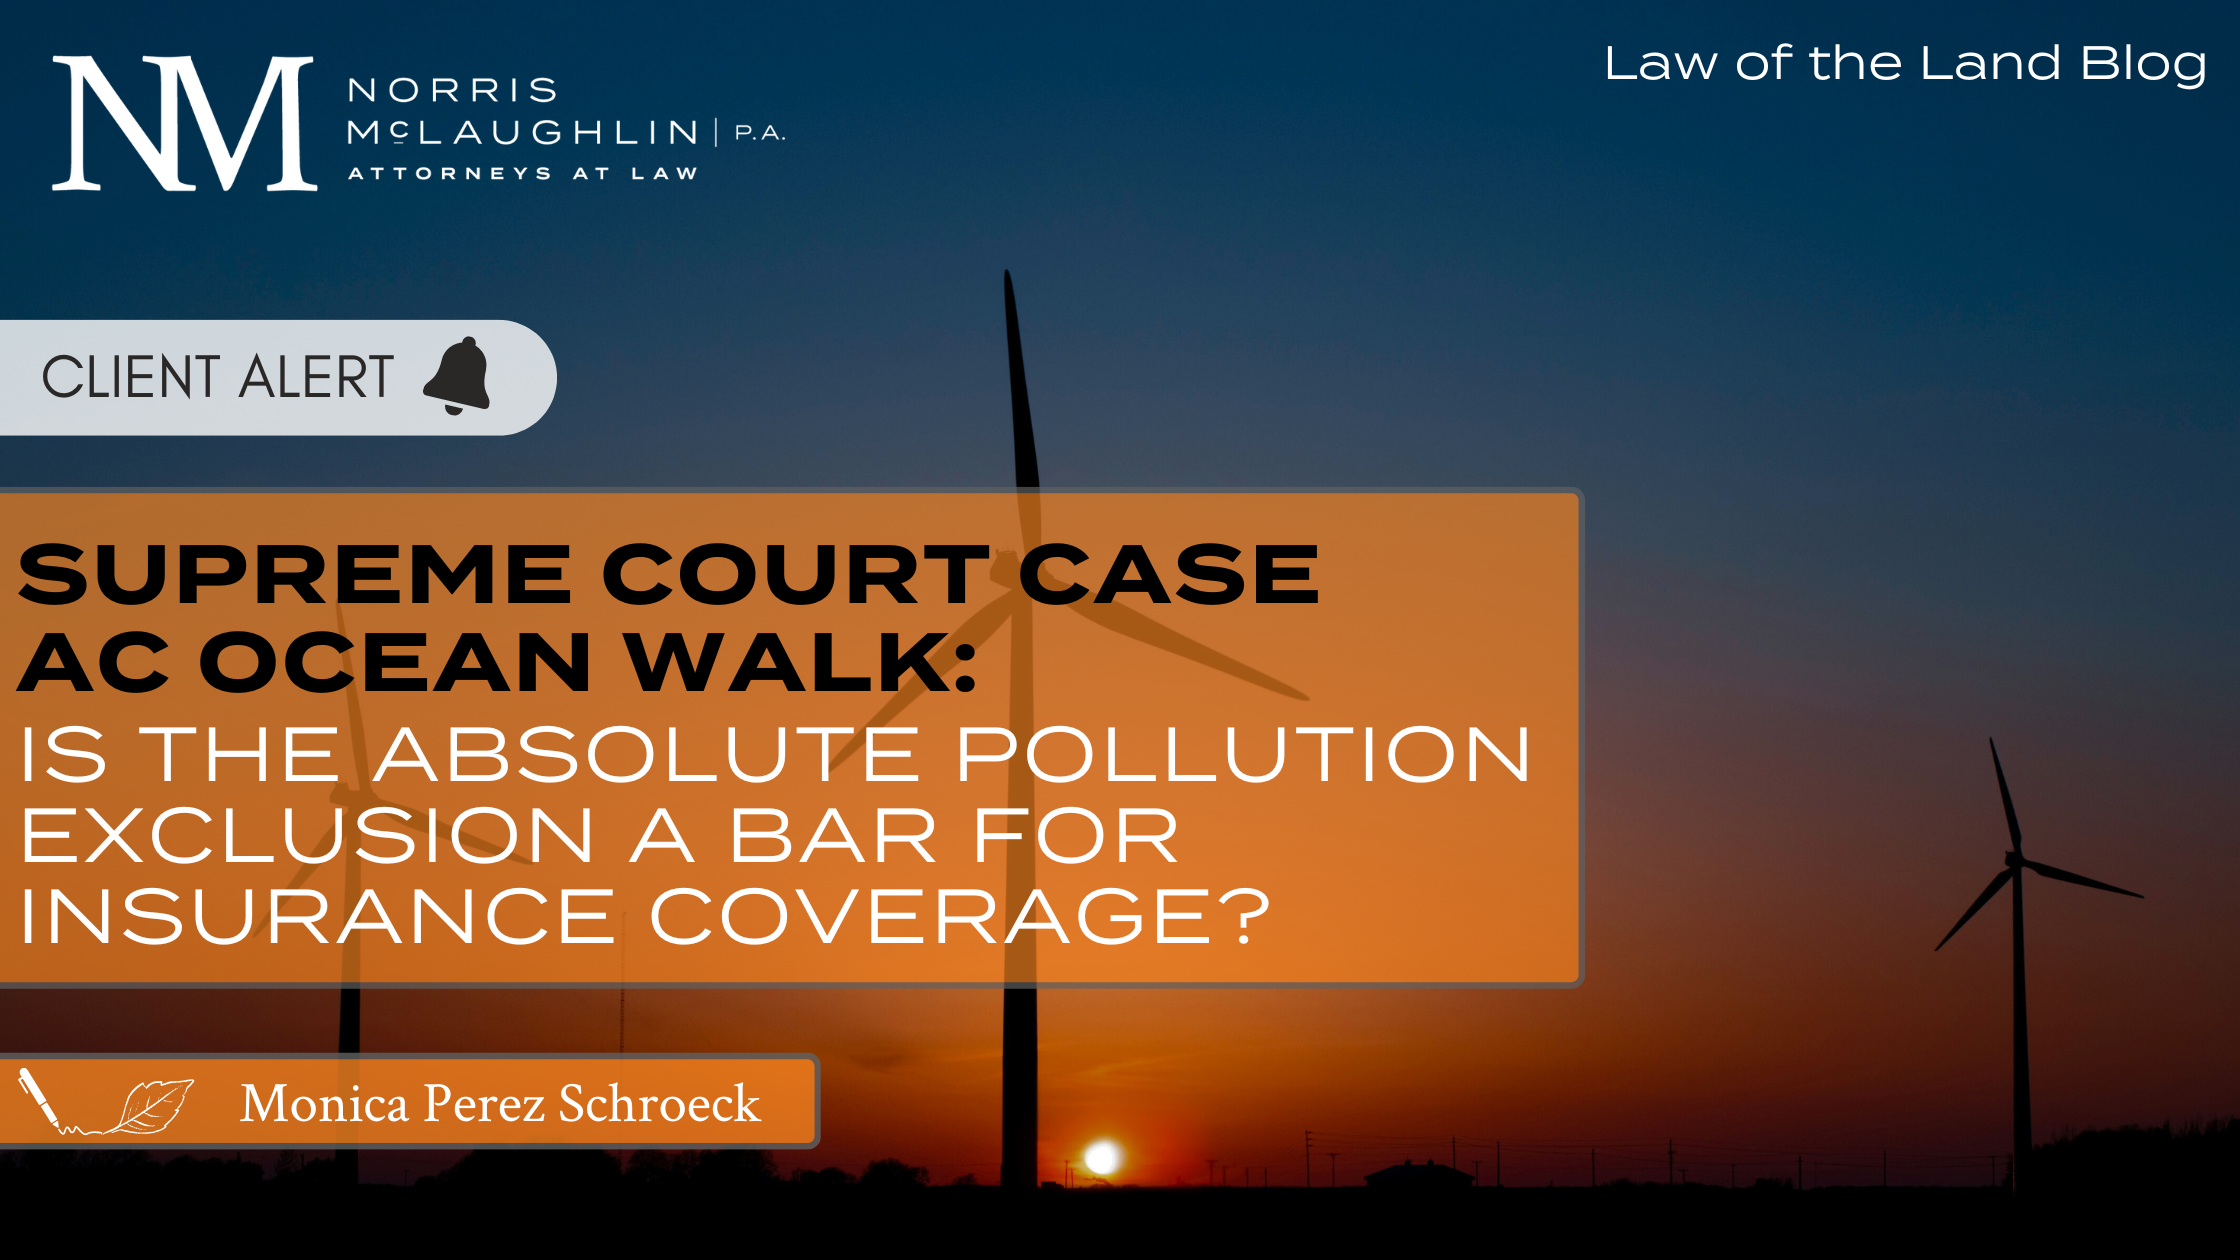 Supreme Court Case AC Ocean Walk: Is the Absolute Pollution Exclusion a Bar for Insurance Coverage?